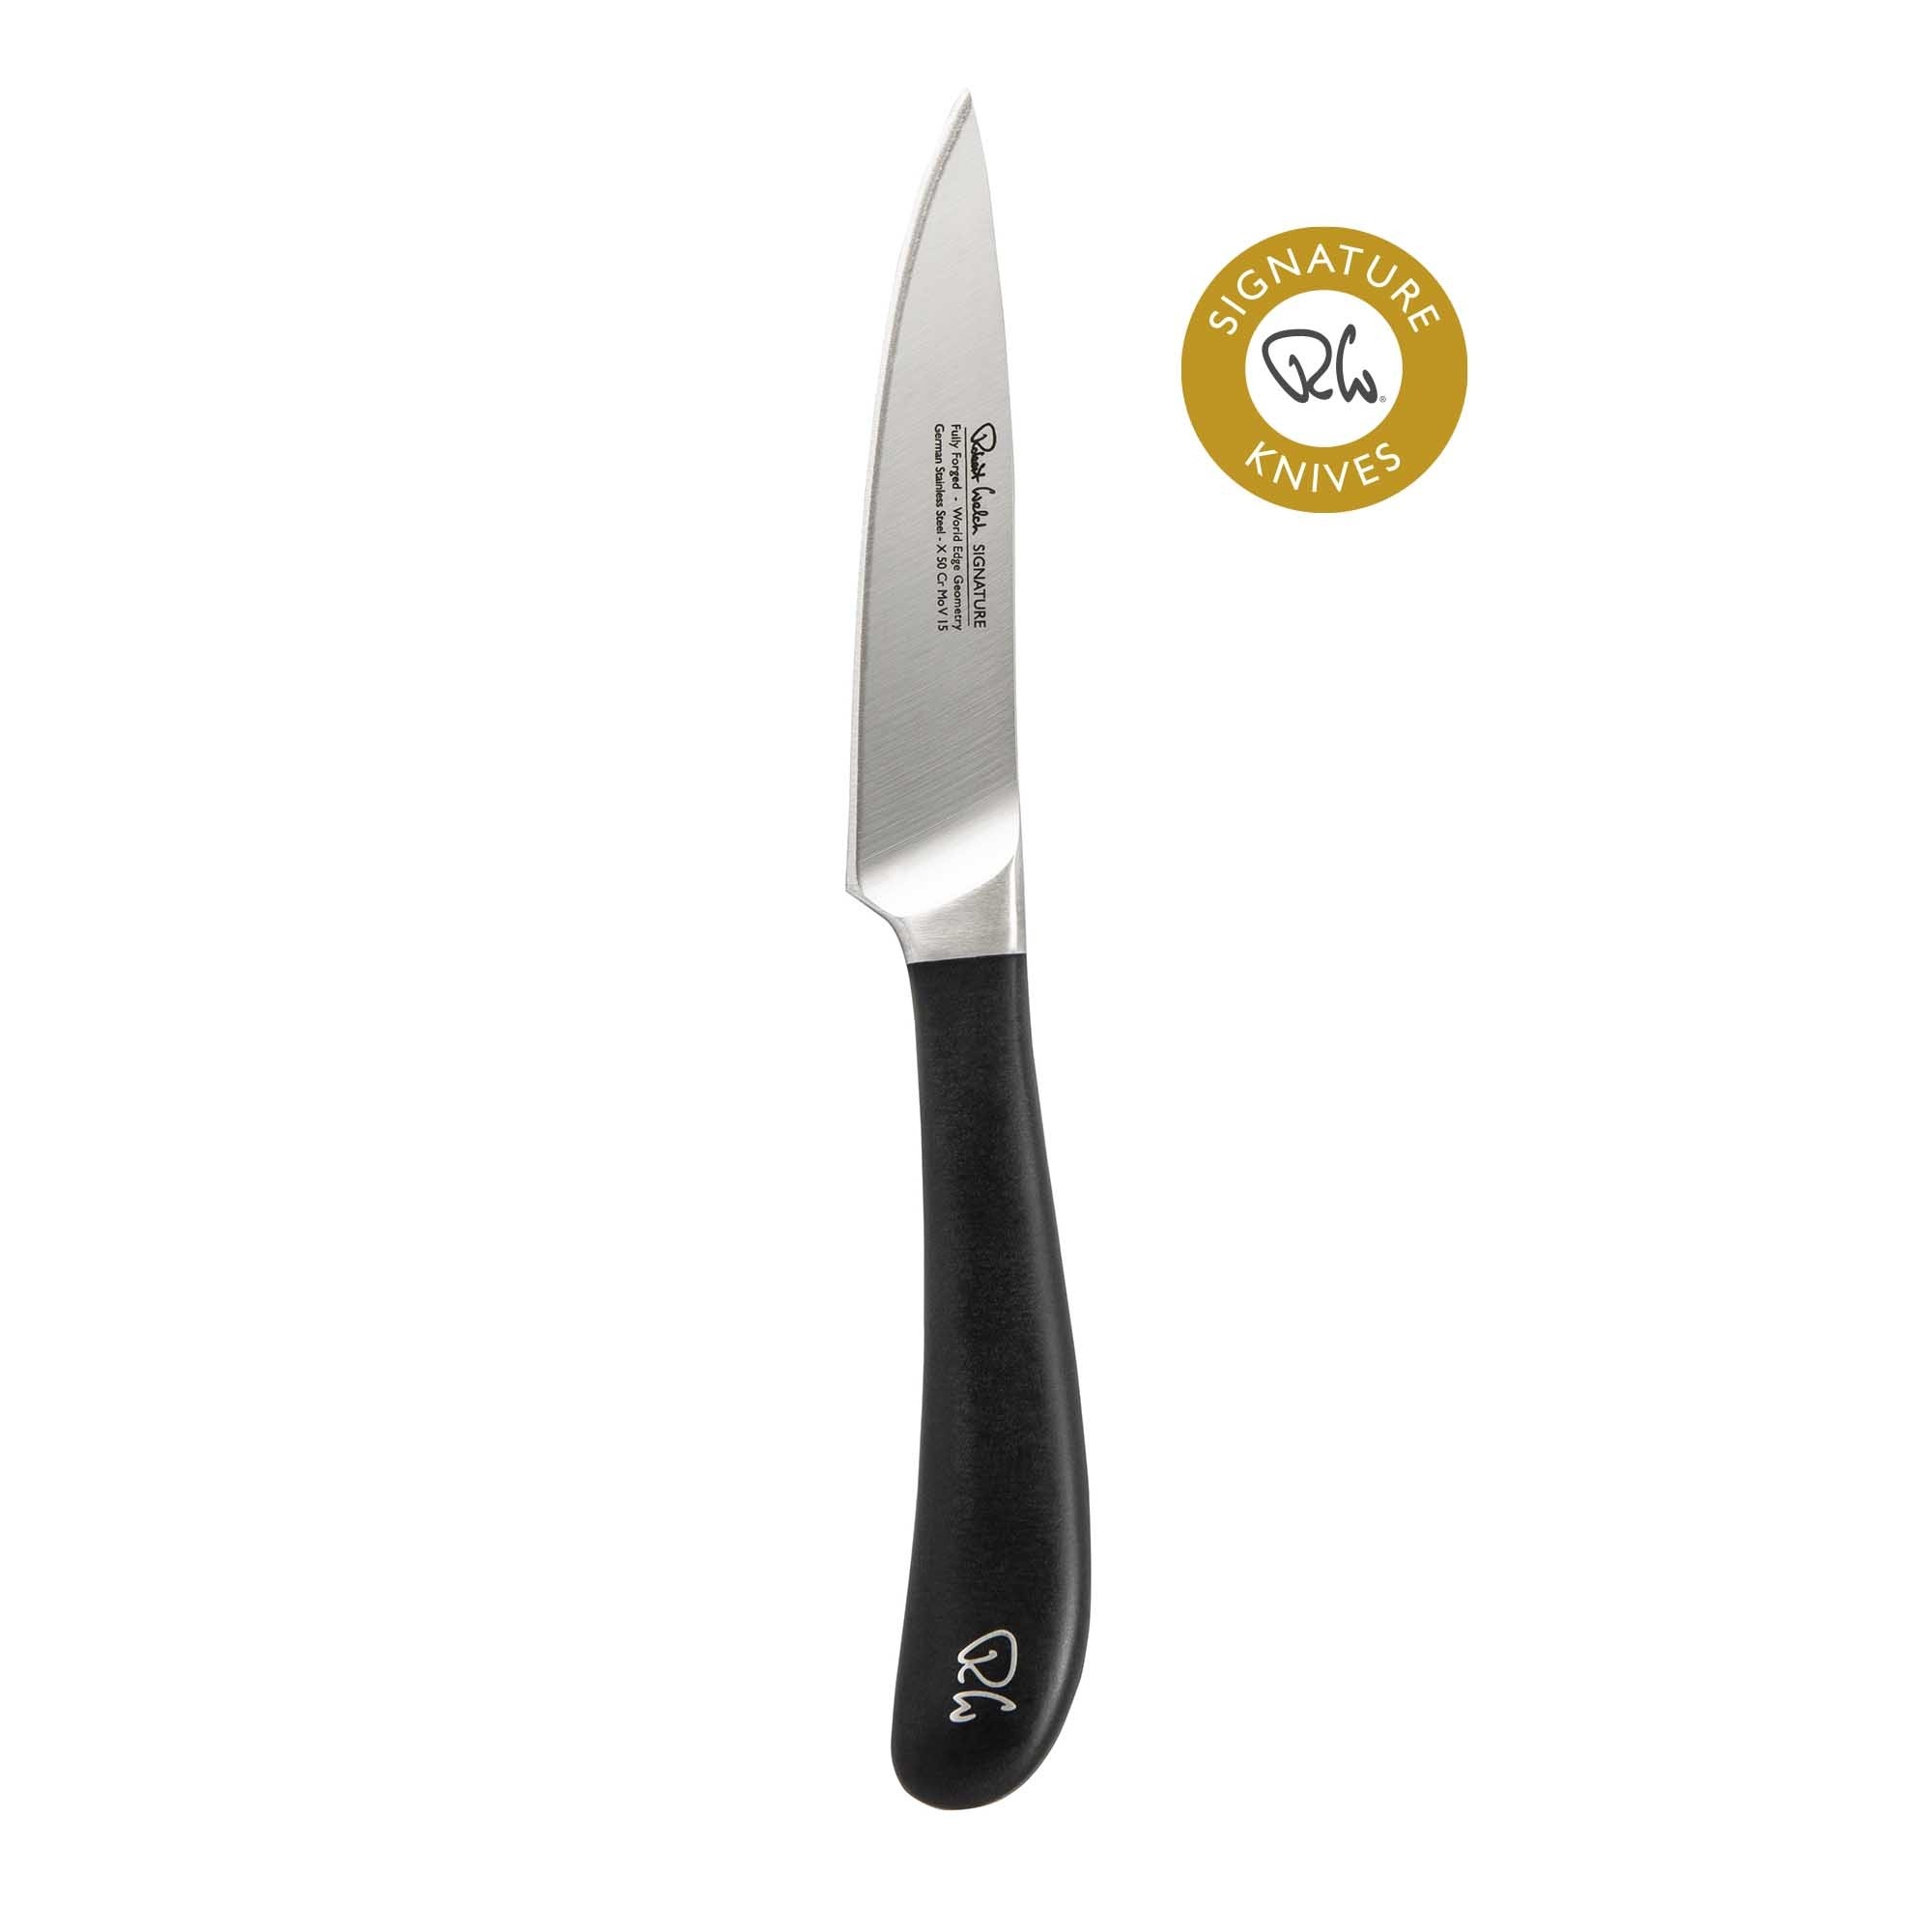 Buy the Robert Welch Signature Vegetable Knife 10cm online at smithsofloughton.com